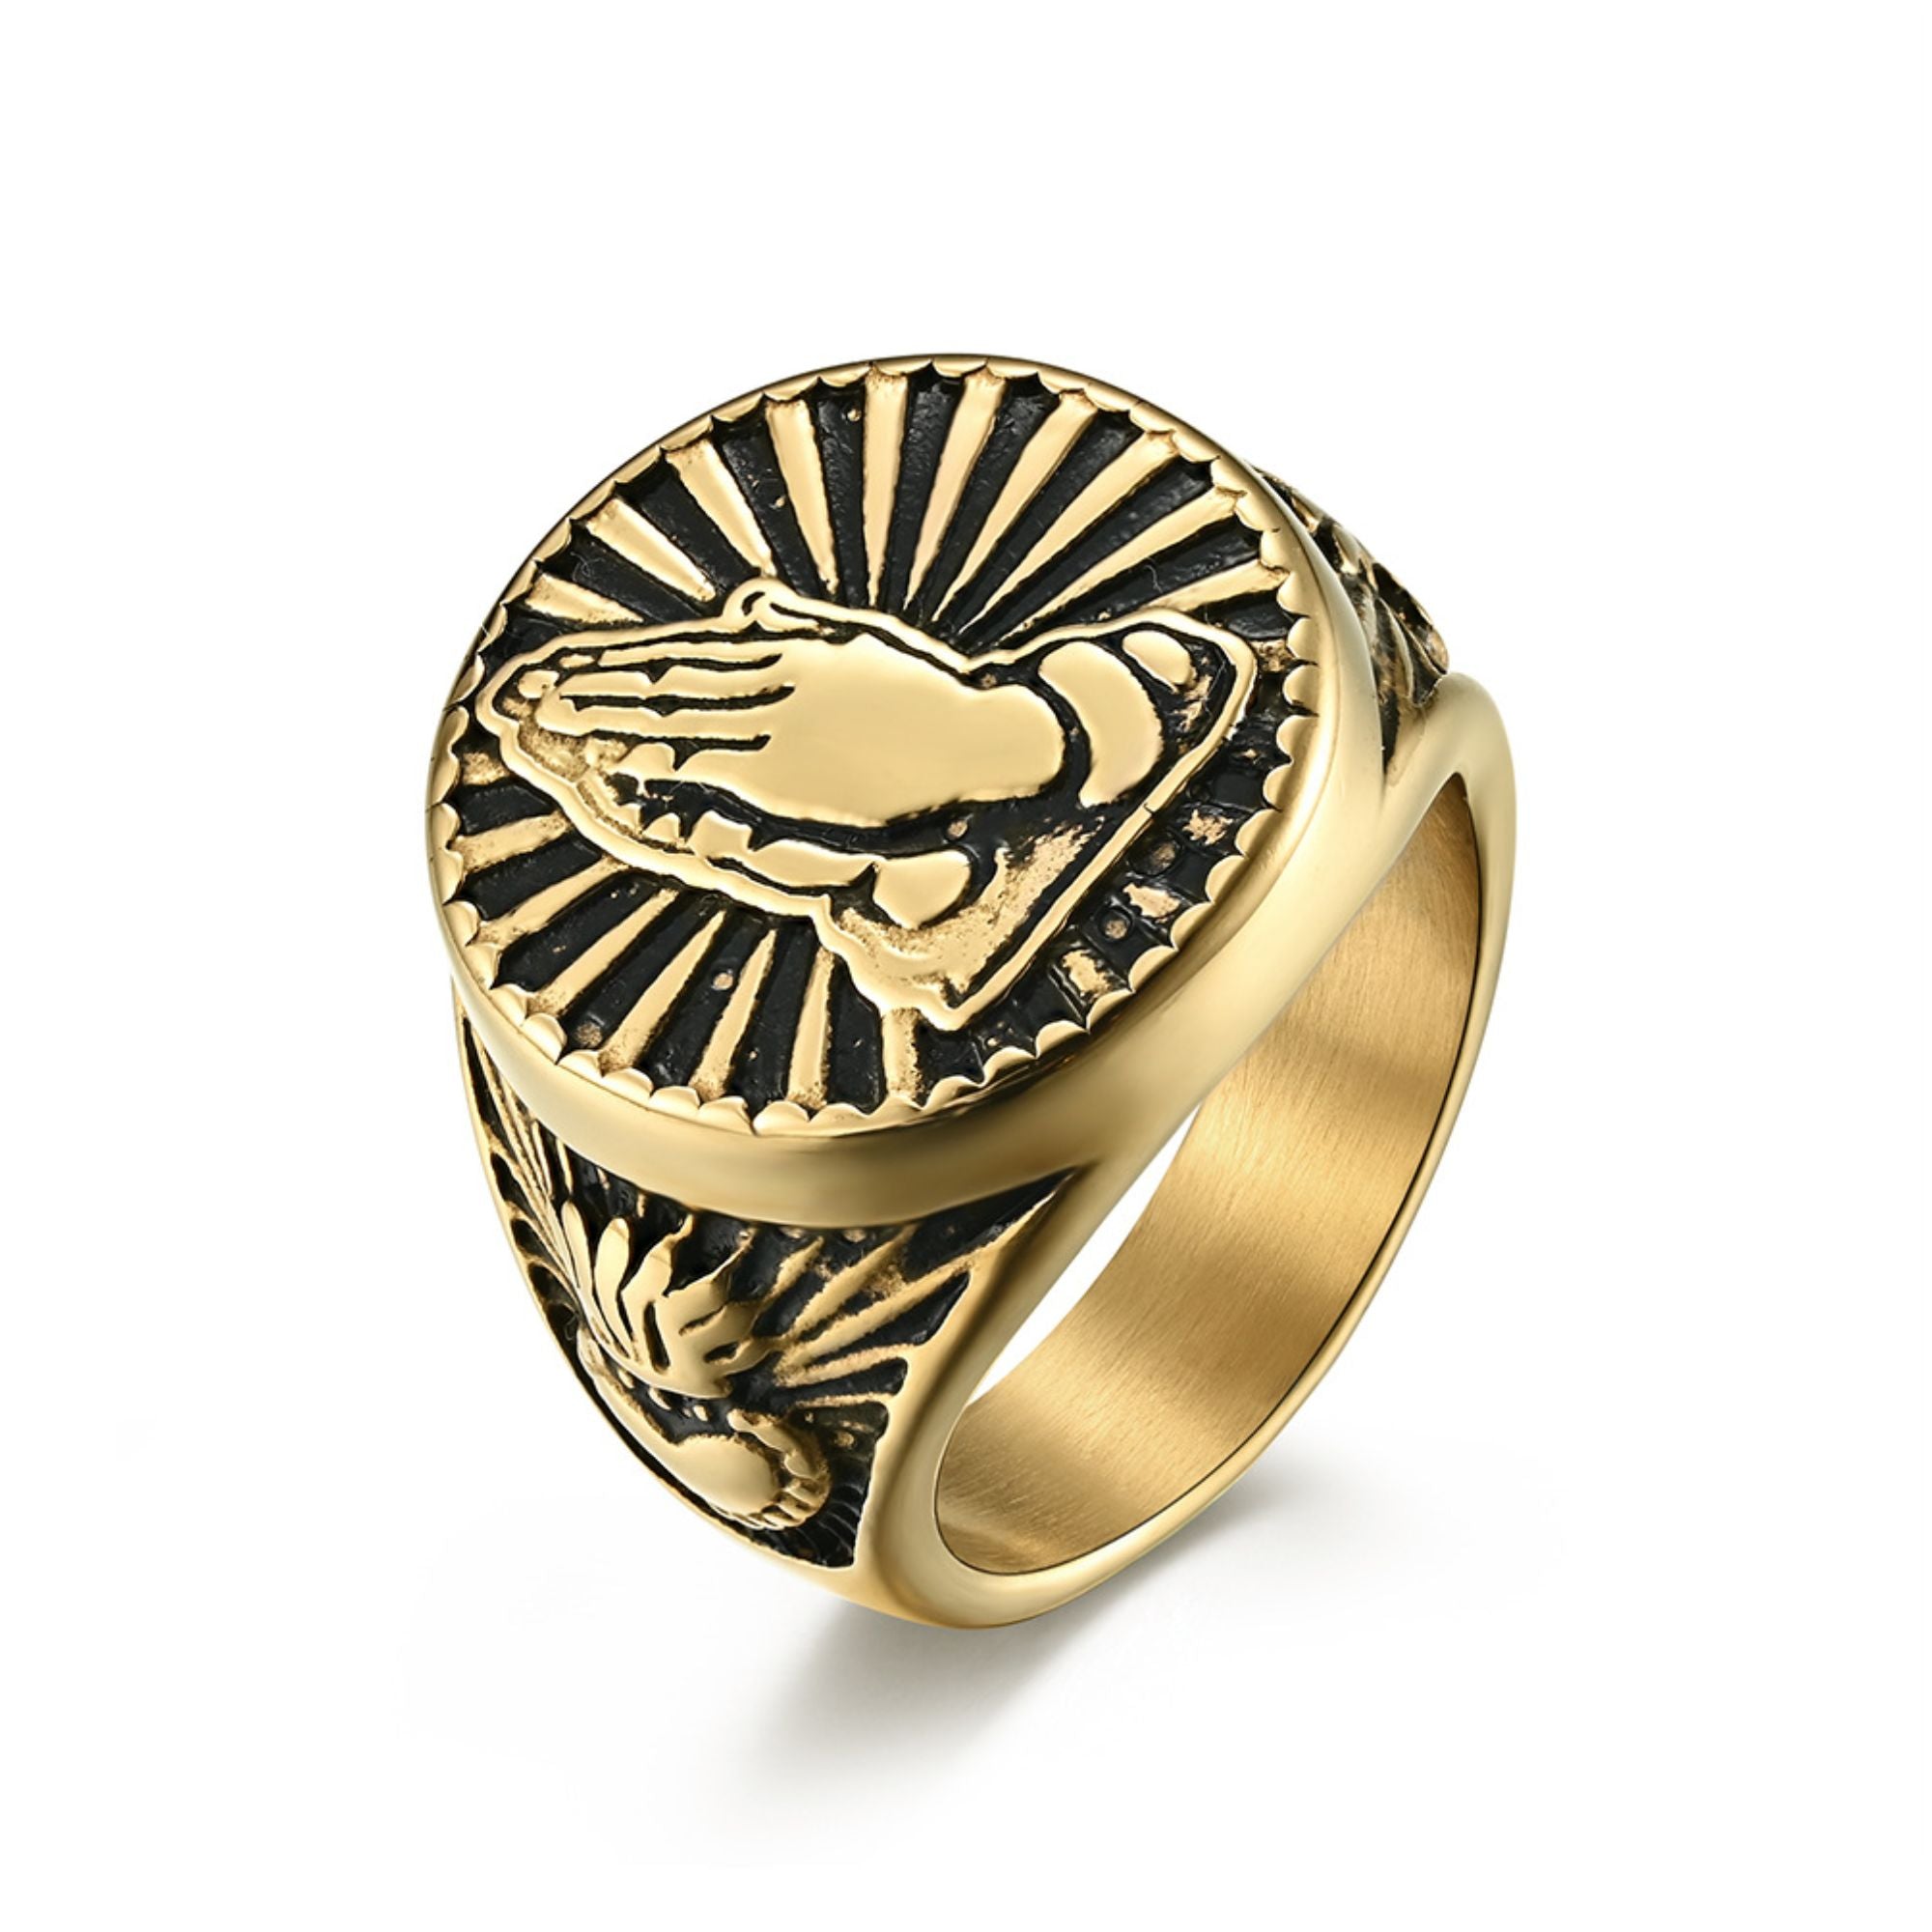 Prayer Hands Stainless Steel Ring - Silver or Gold Tone Color: Silver Size: 8 Jesus Passion Apparel